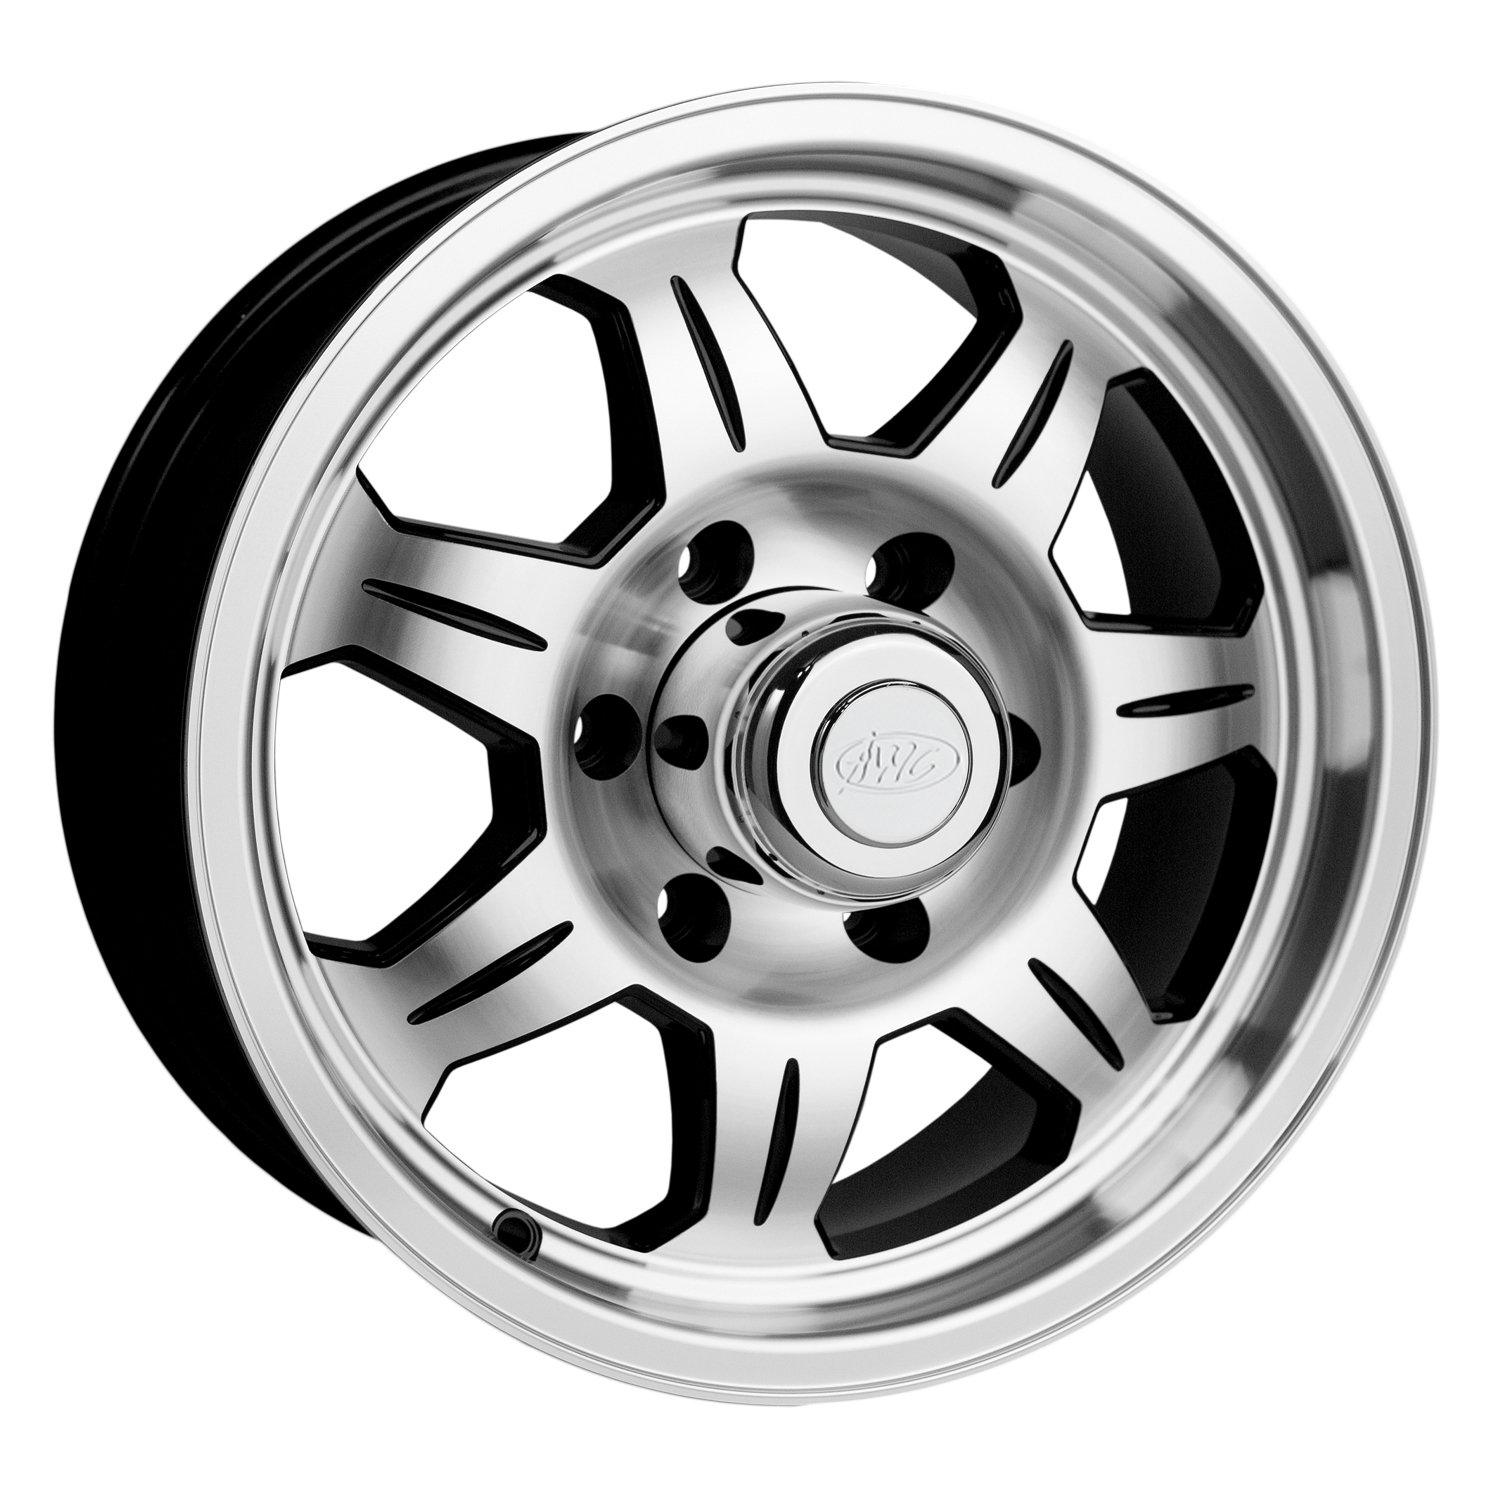 870 ELEMENT Trailer Wheel Size: 12 X 4" Bolt Pattern: 4 x 4" (101.60 mm) [Machined with Black Accents]